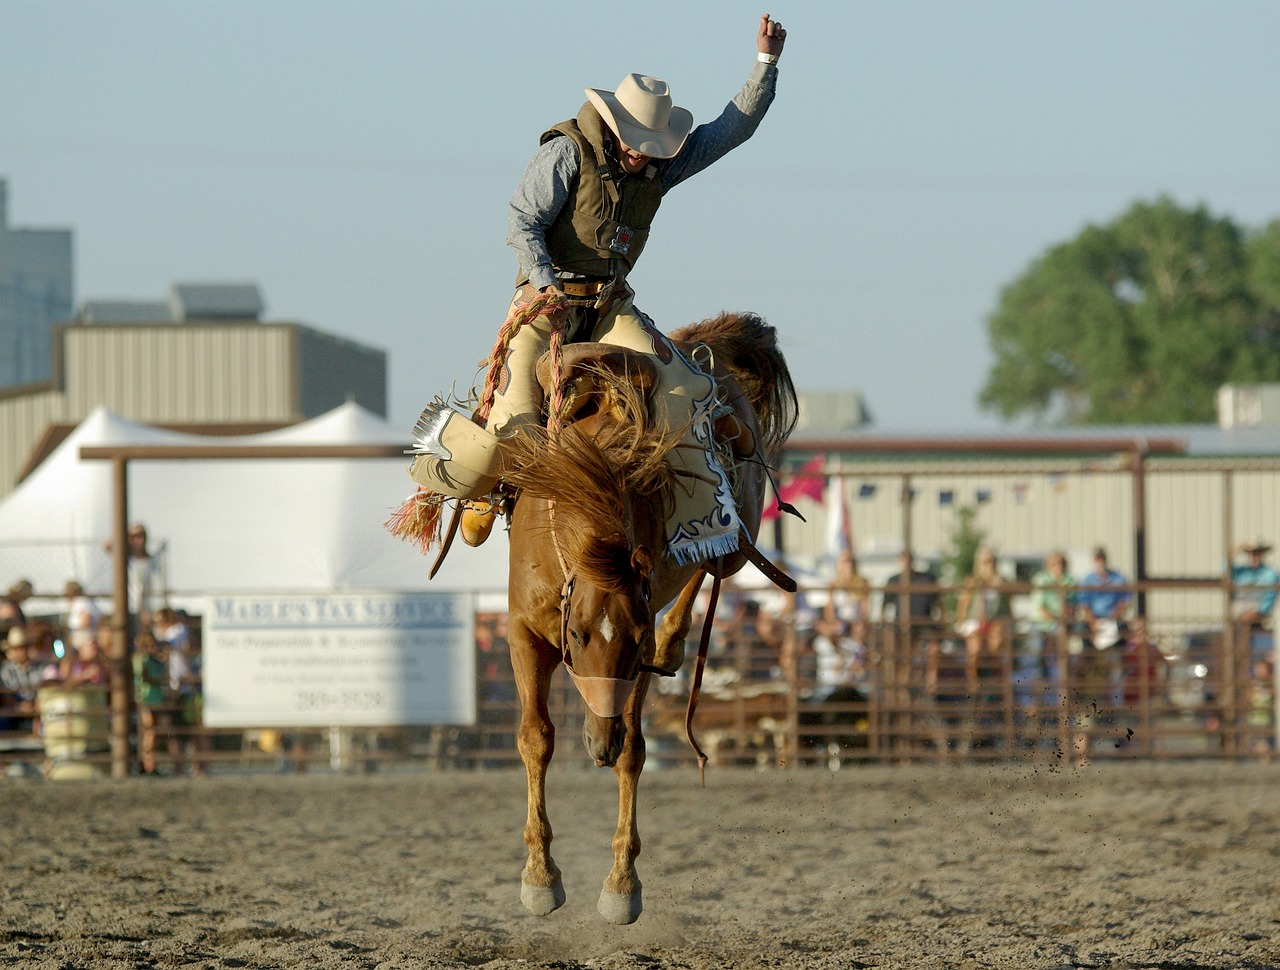 a cowboy on horseback at a local rodeo in Australia